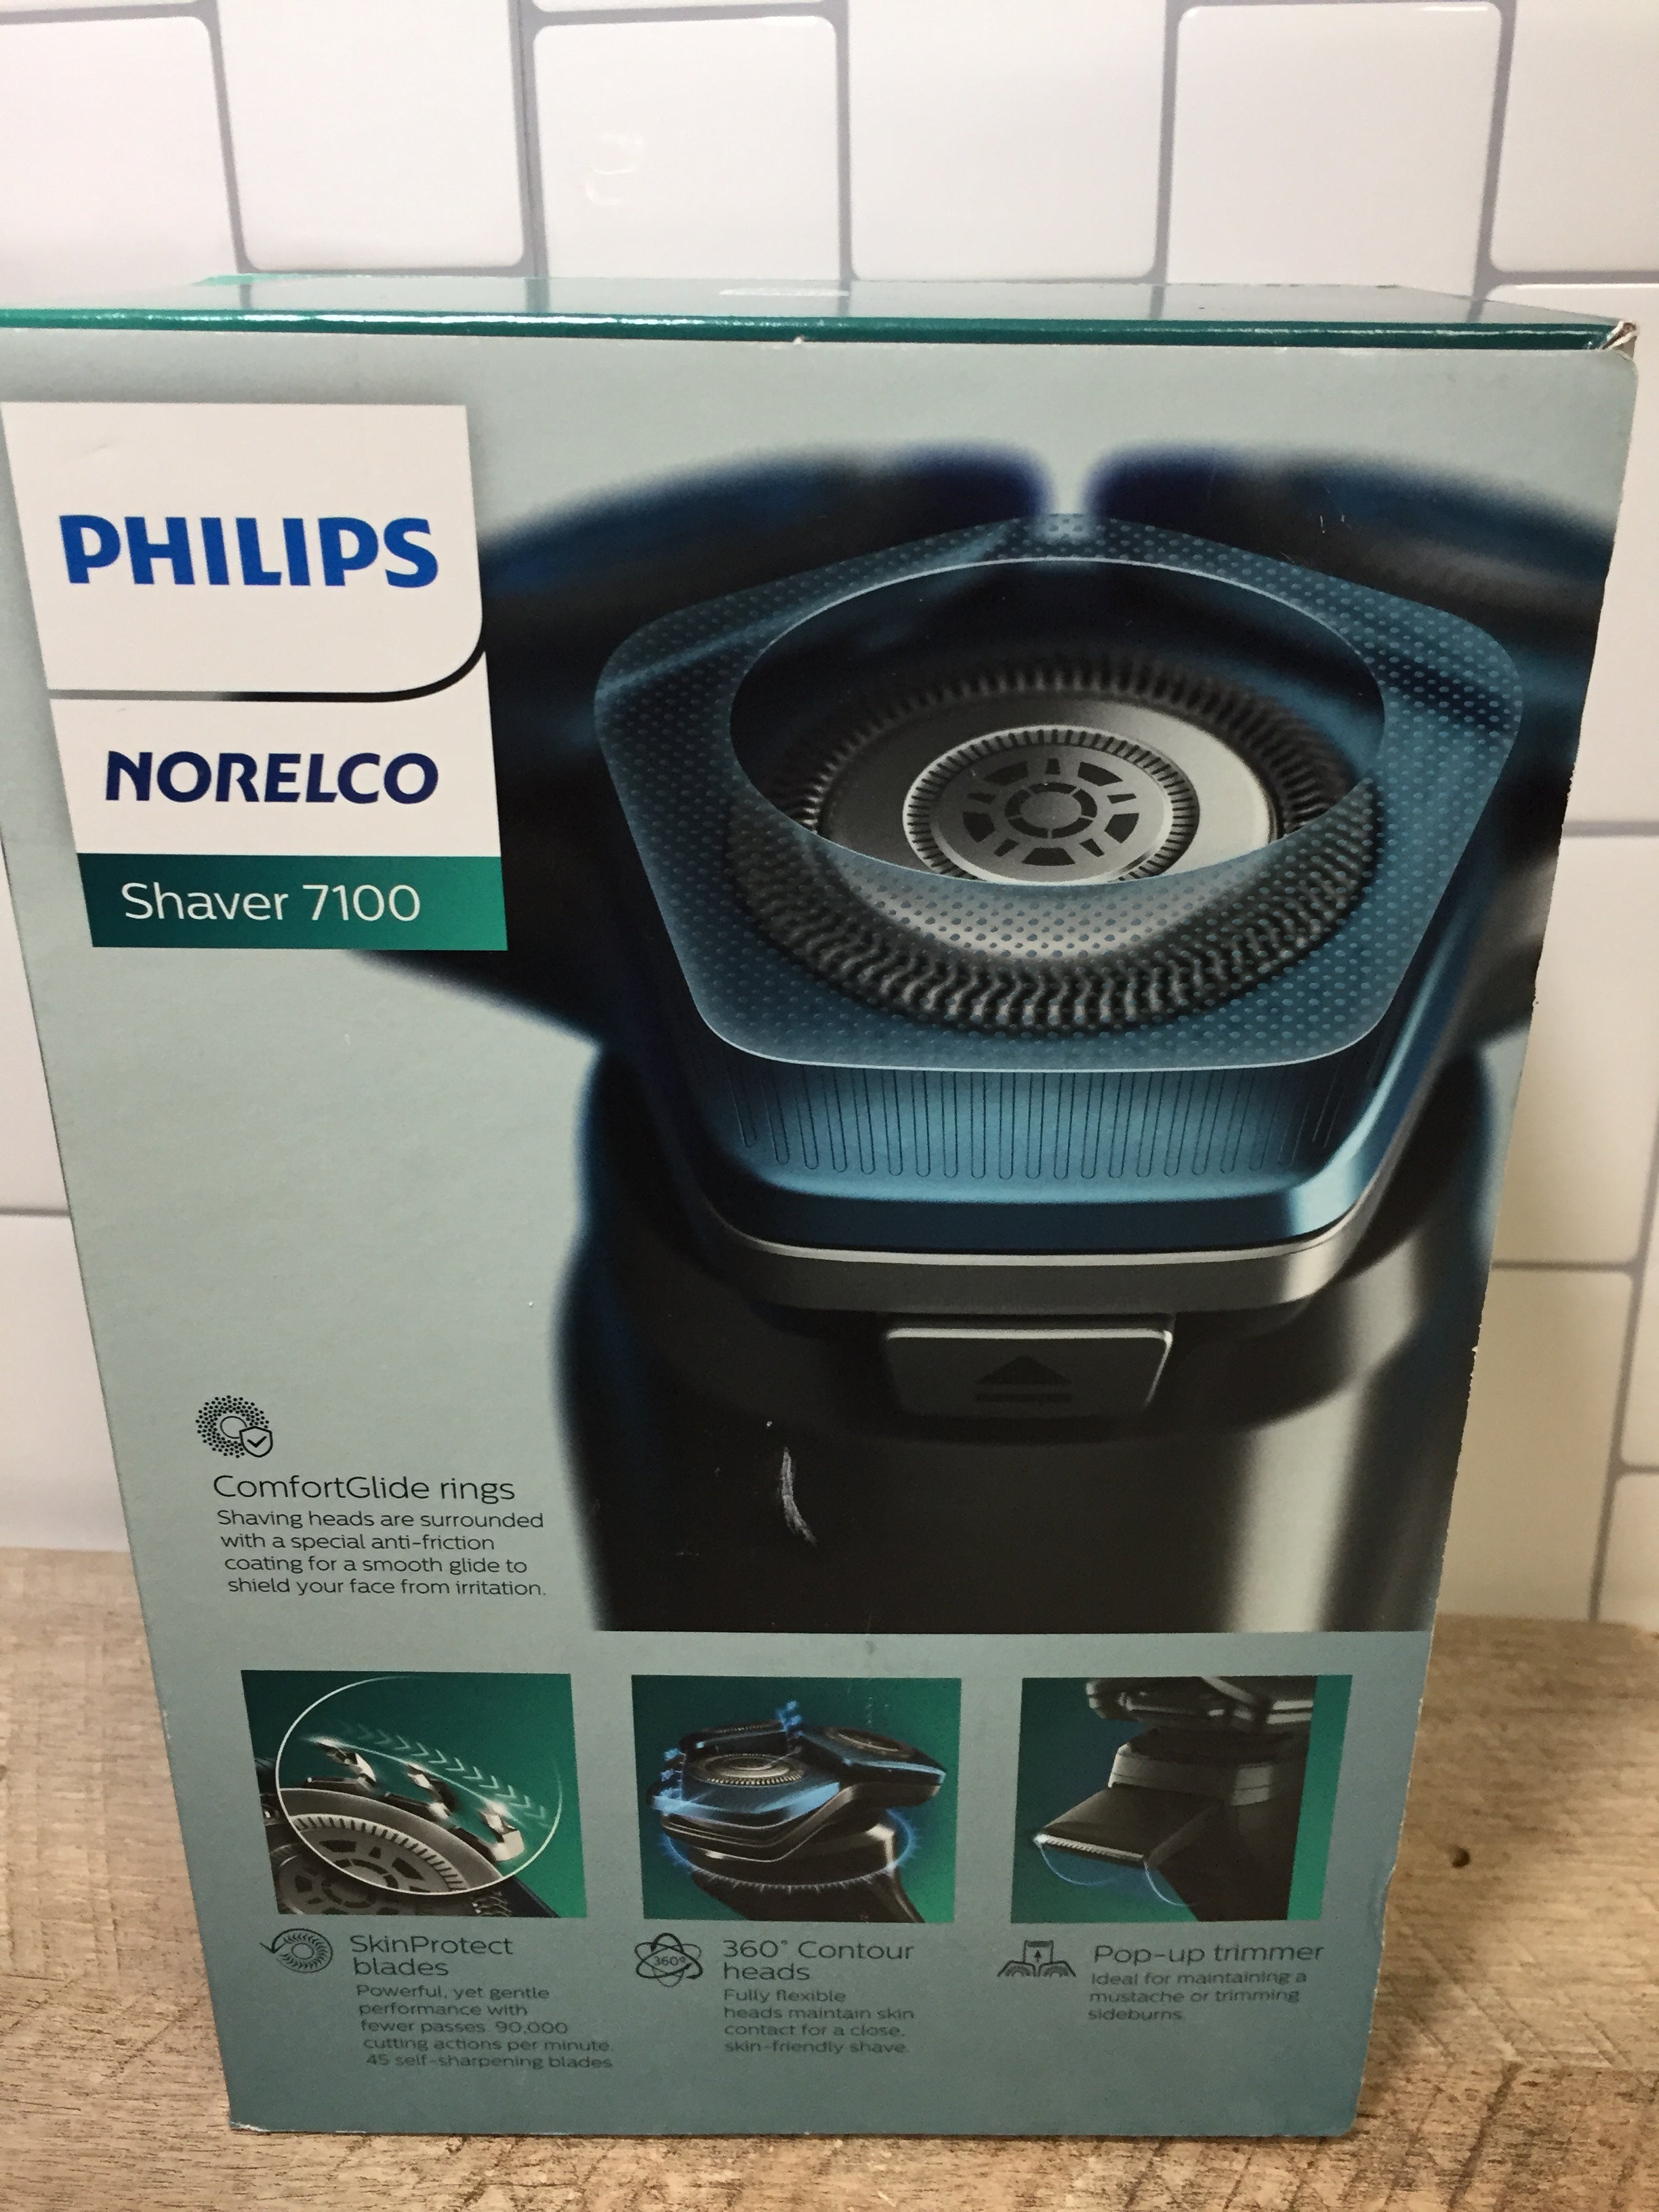 Philips Norelco Shaver 7100, Rechargeable Wet & Dry Electric Shaver S7788/82 (7339721654510)